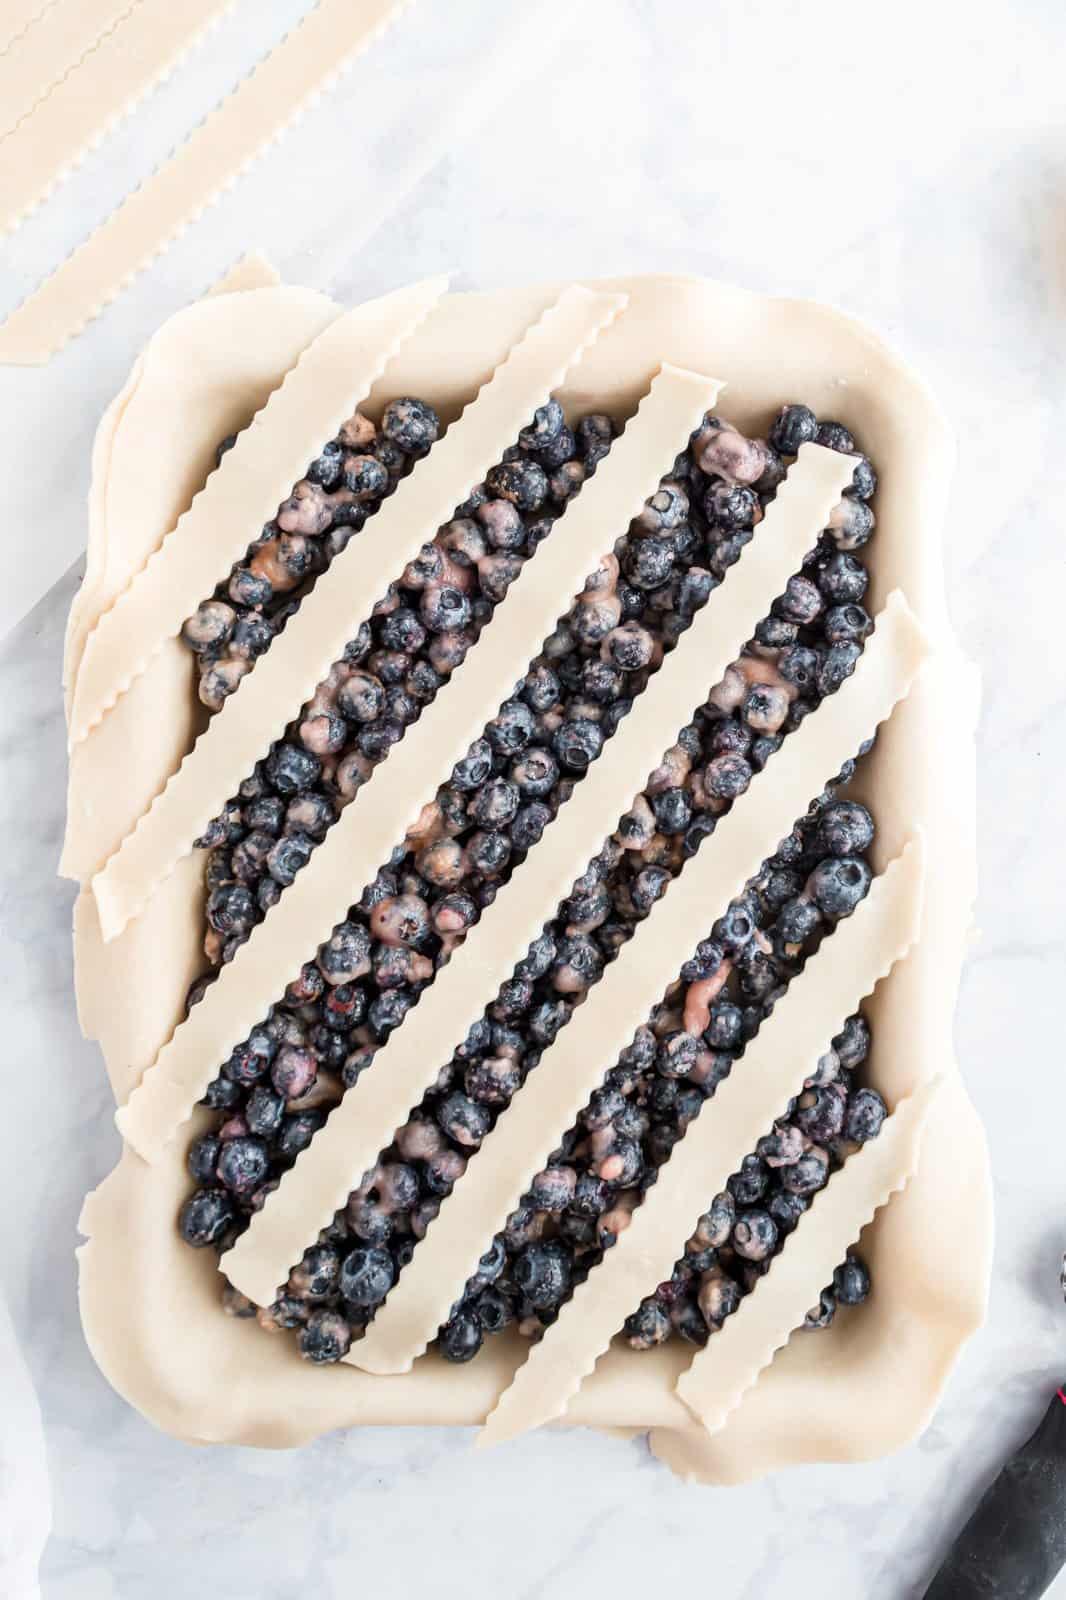 Strips of dough laid out over blueberry pie filing.